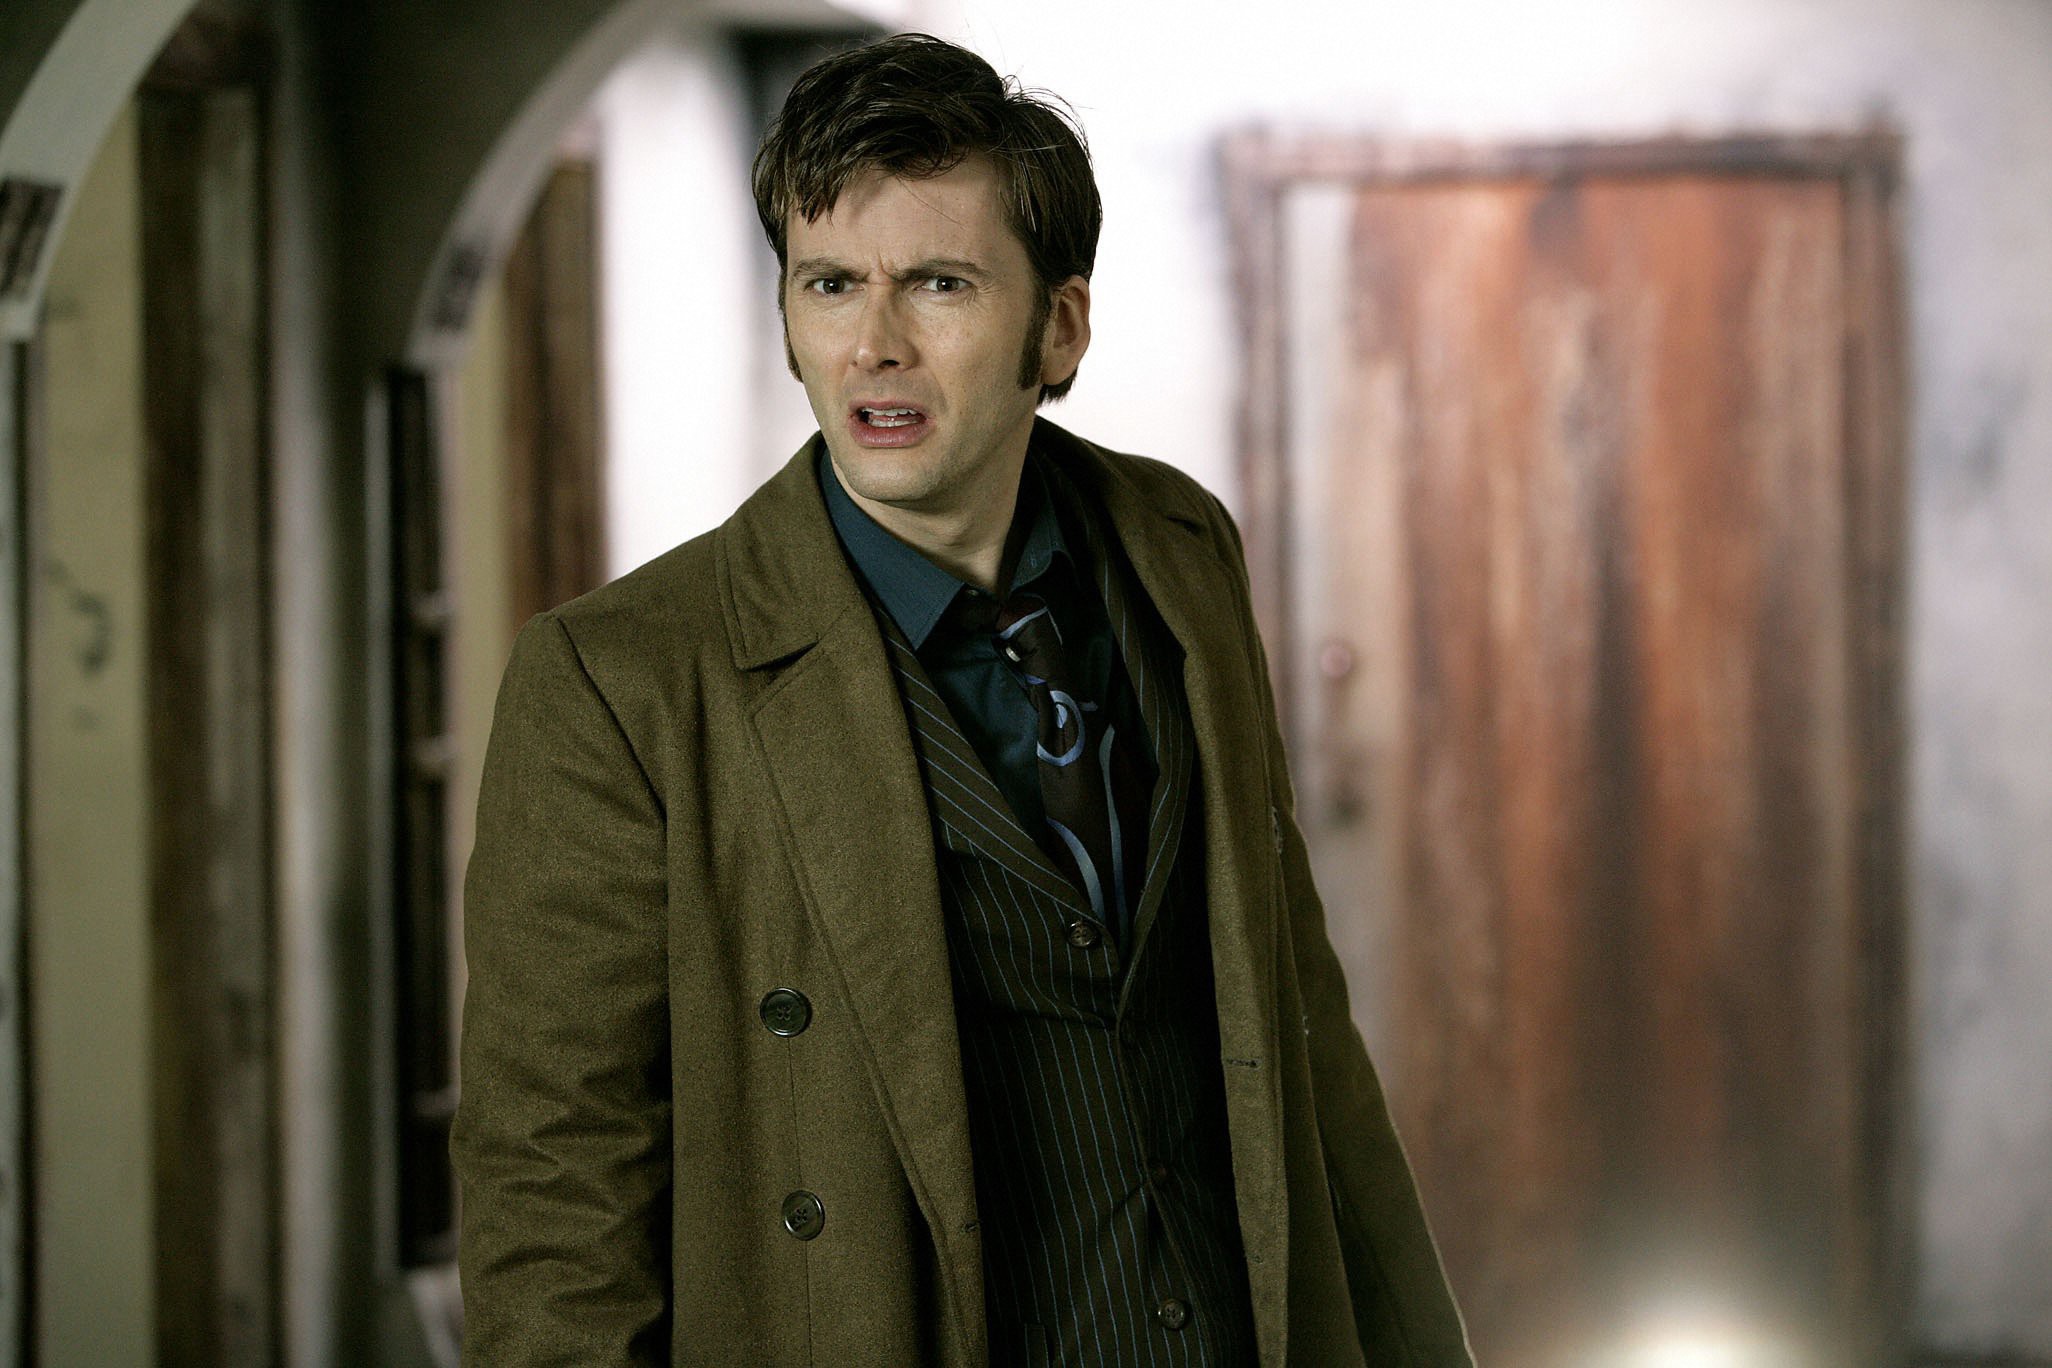 David Tennant Doctor Who Tenth Doctor 2052x1368